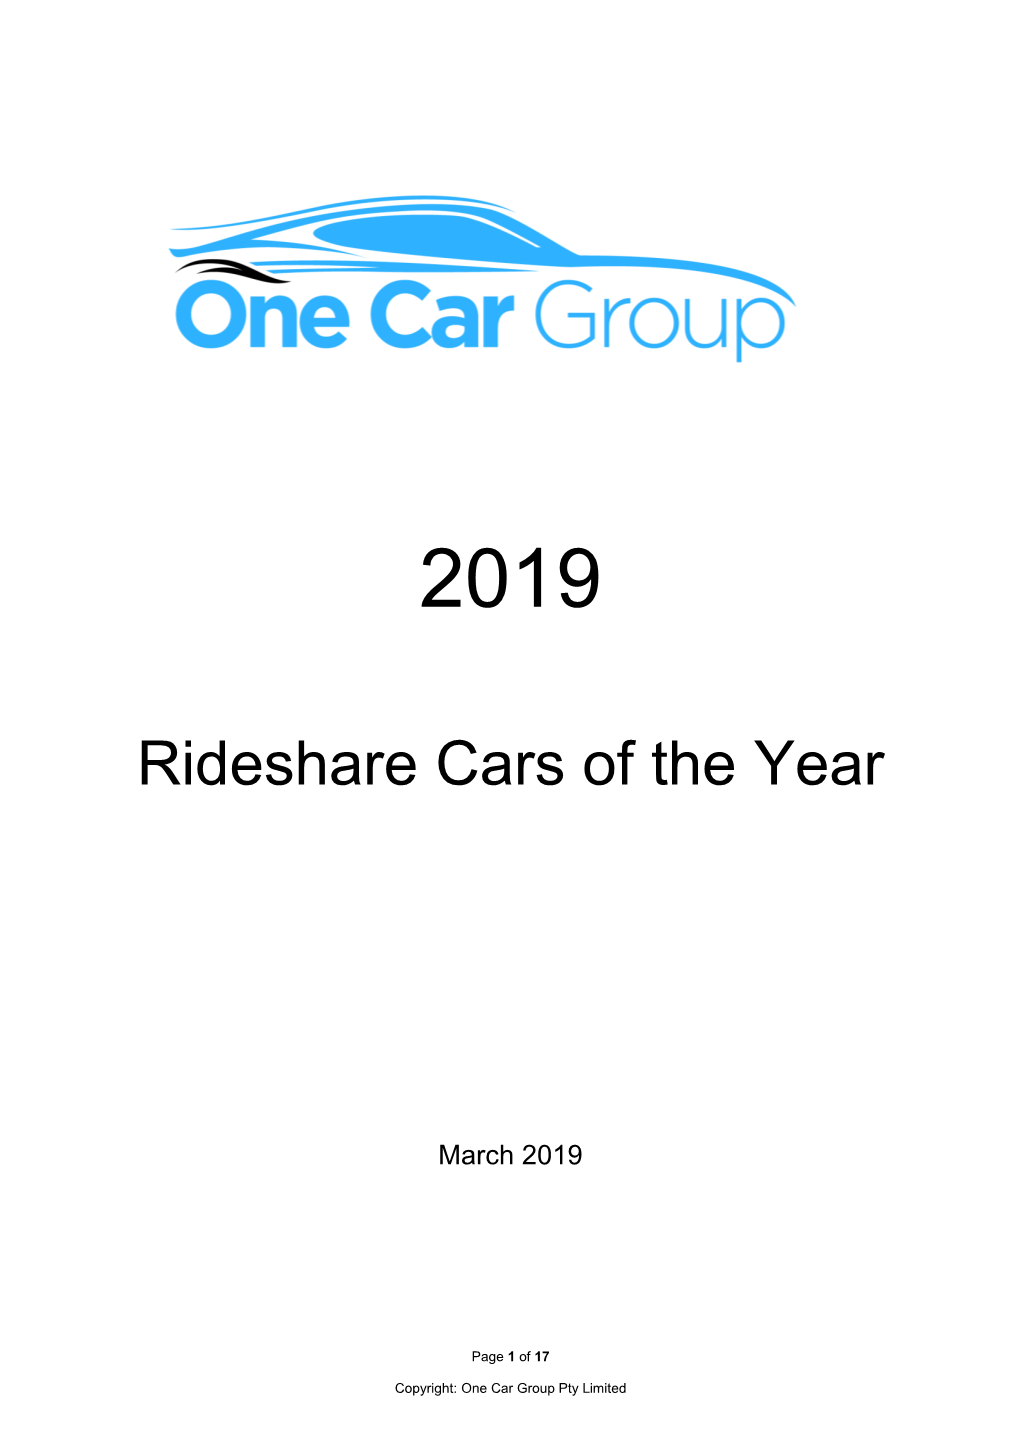 Rideshare Cars of the Year